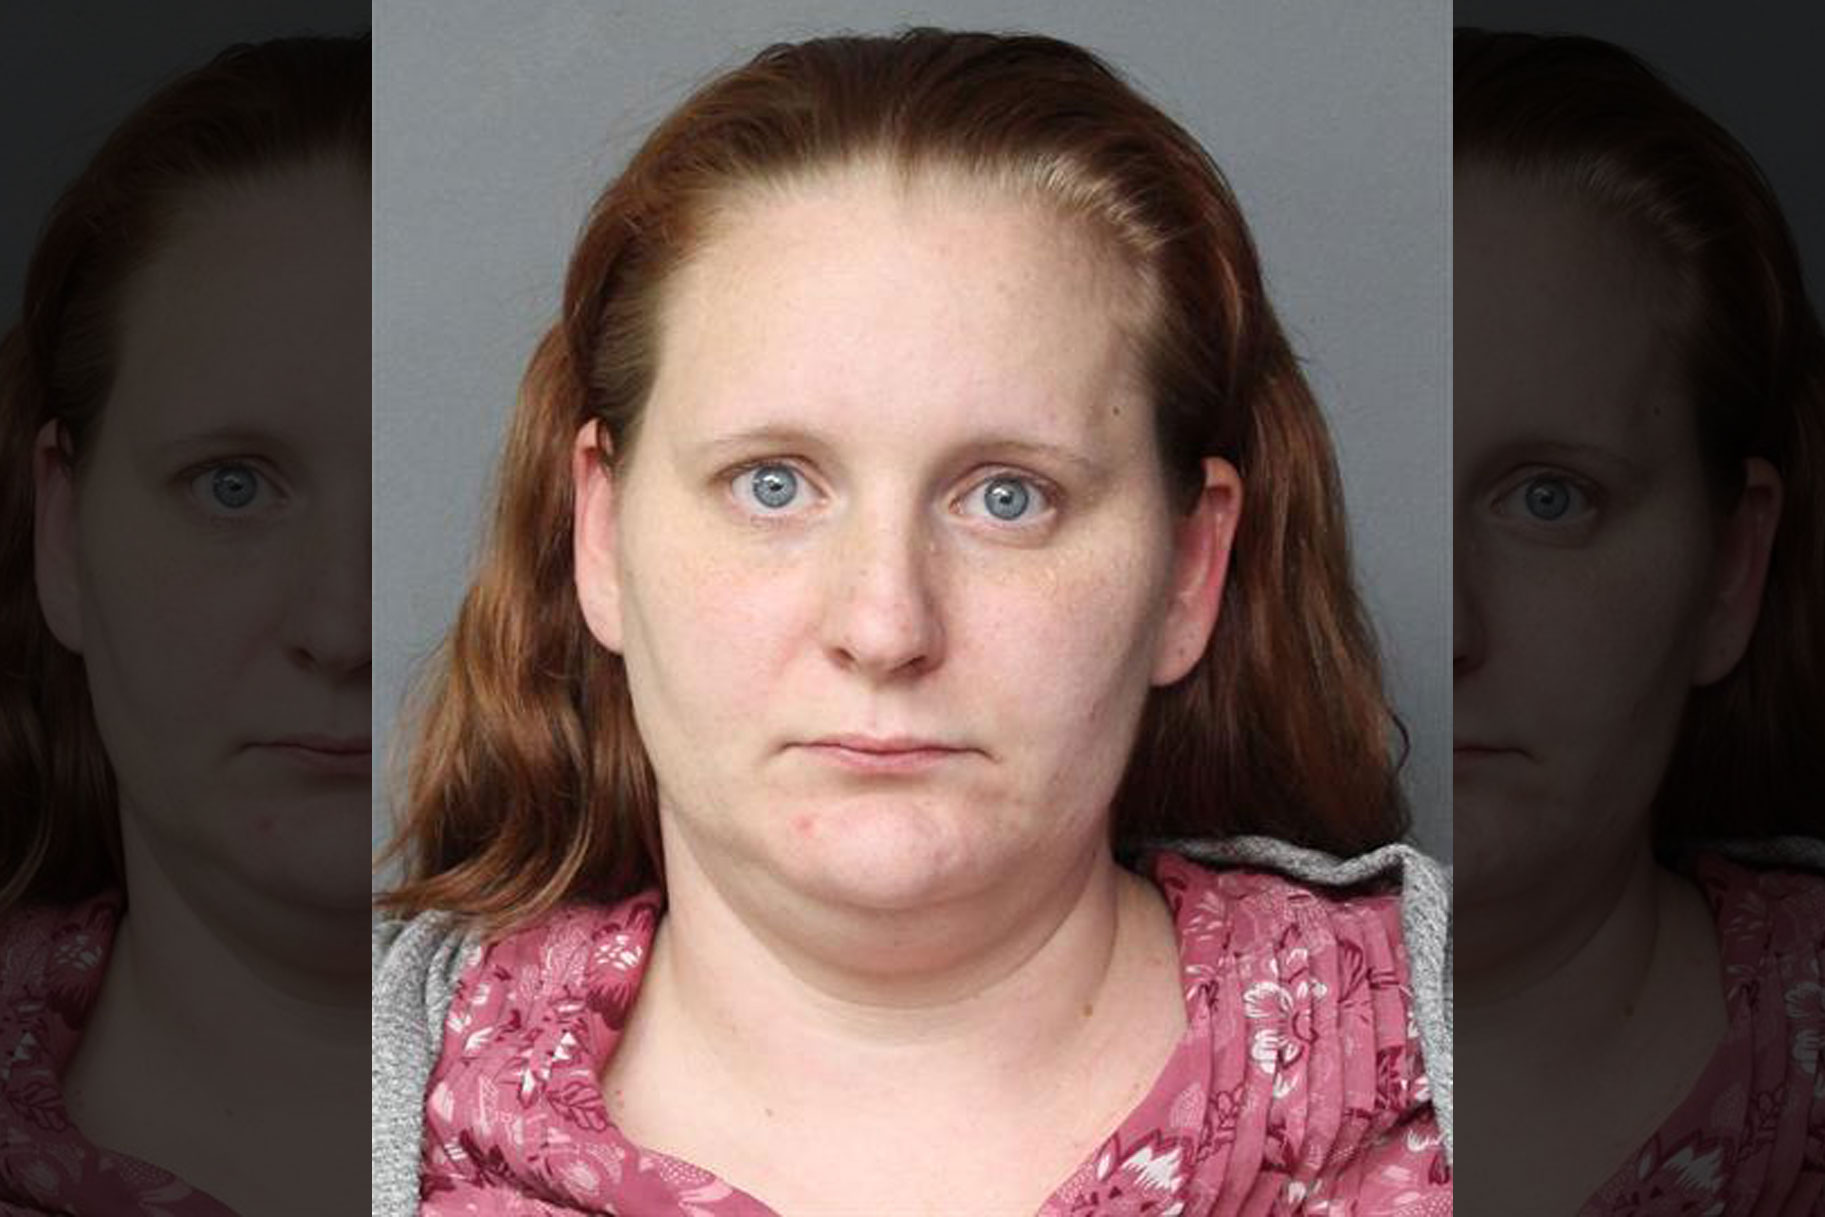 Catherine Seals Indicted On Murder Charges In Larkin Carr's Death | Crime News1825 x 1217